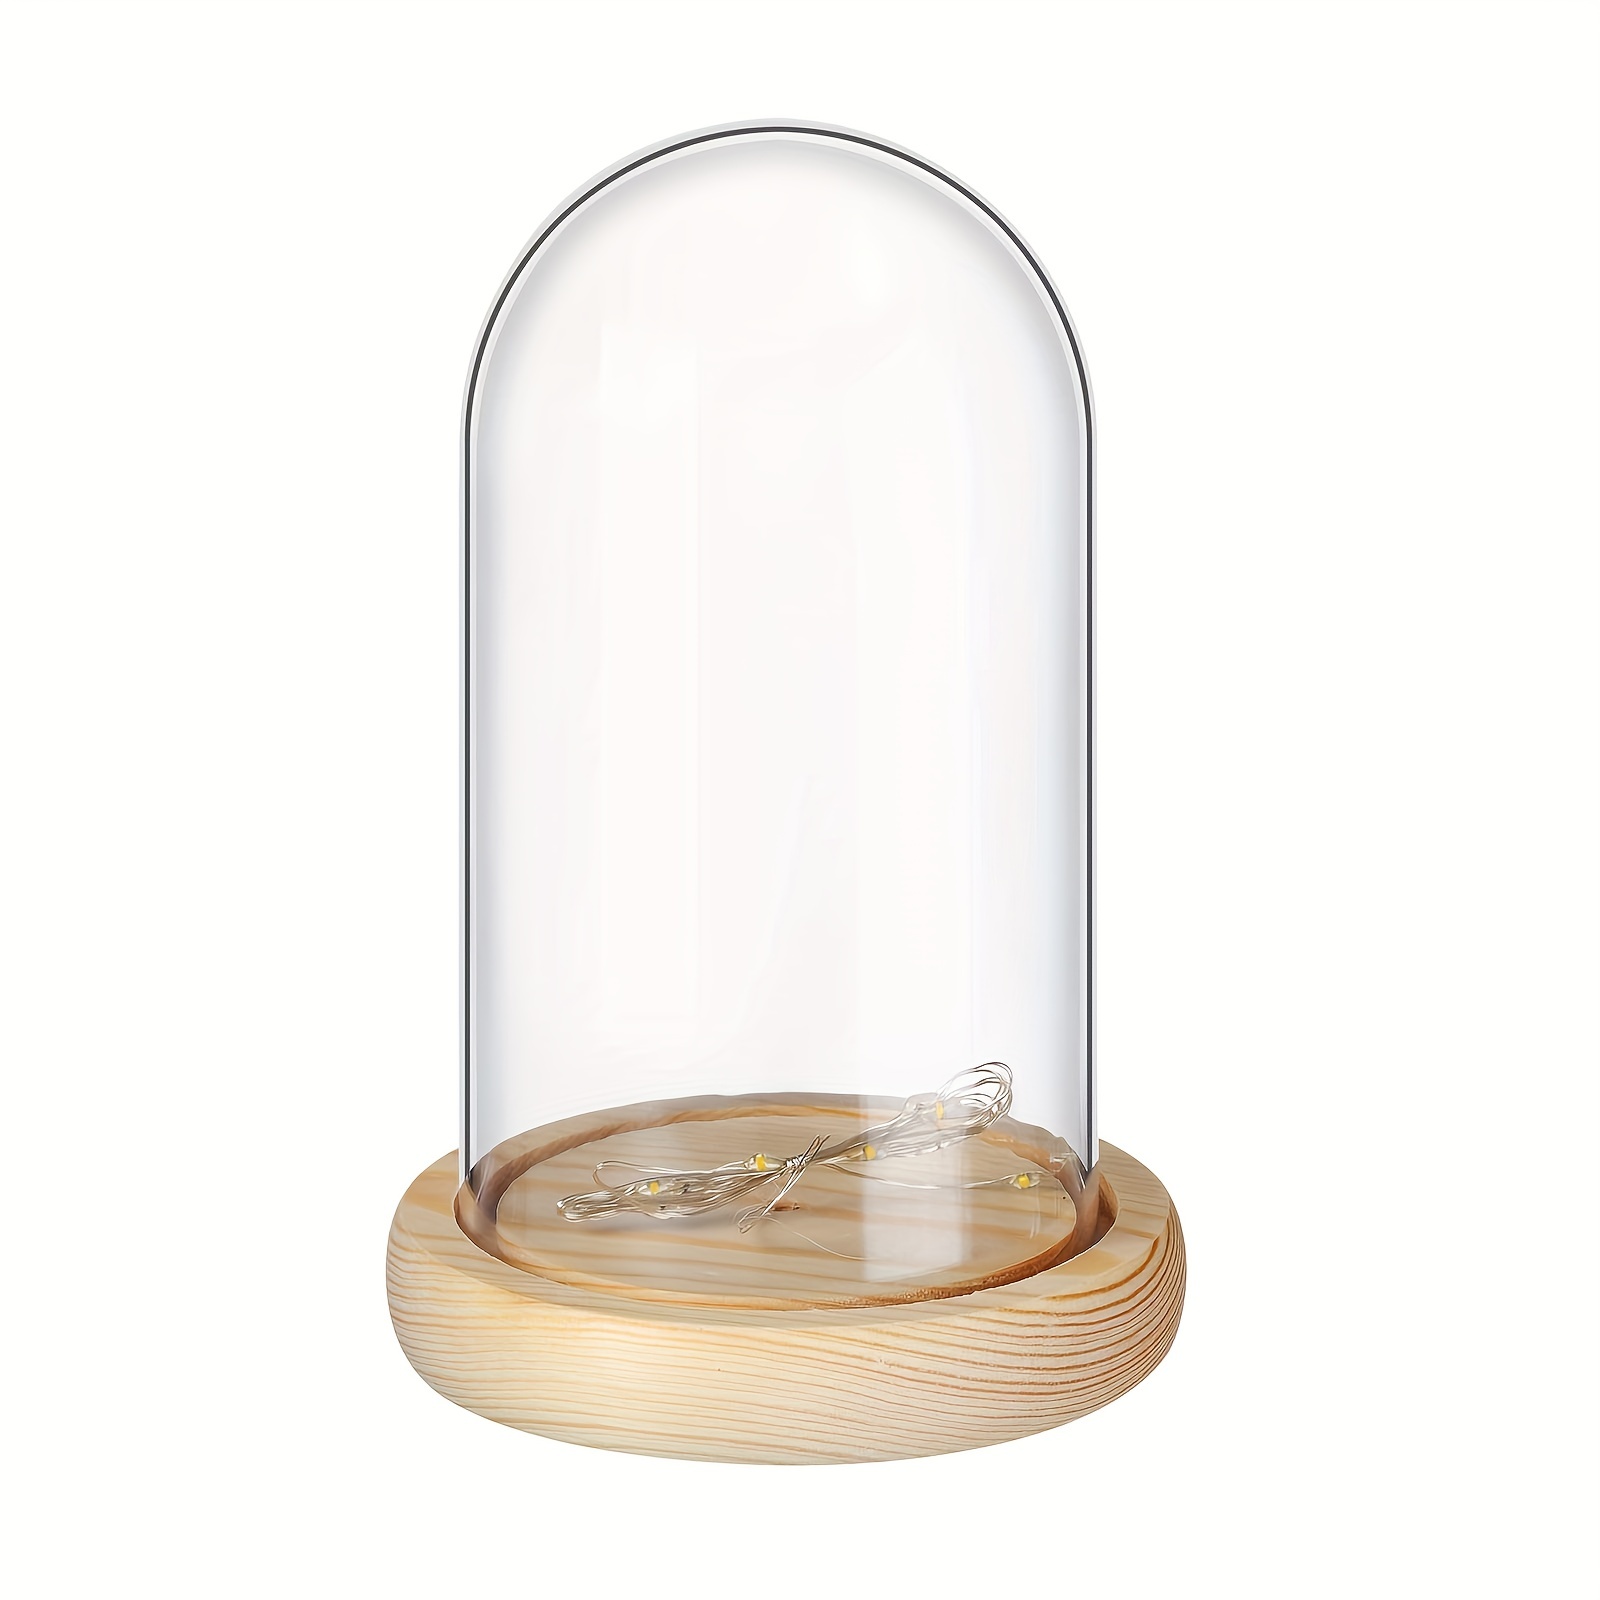 

1 Set Glass Dome Display Case - Perfect For Home Decor, Christmas Party Favors, And Flower Storage!